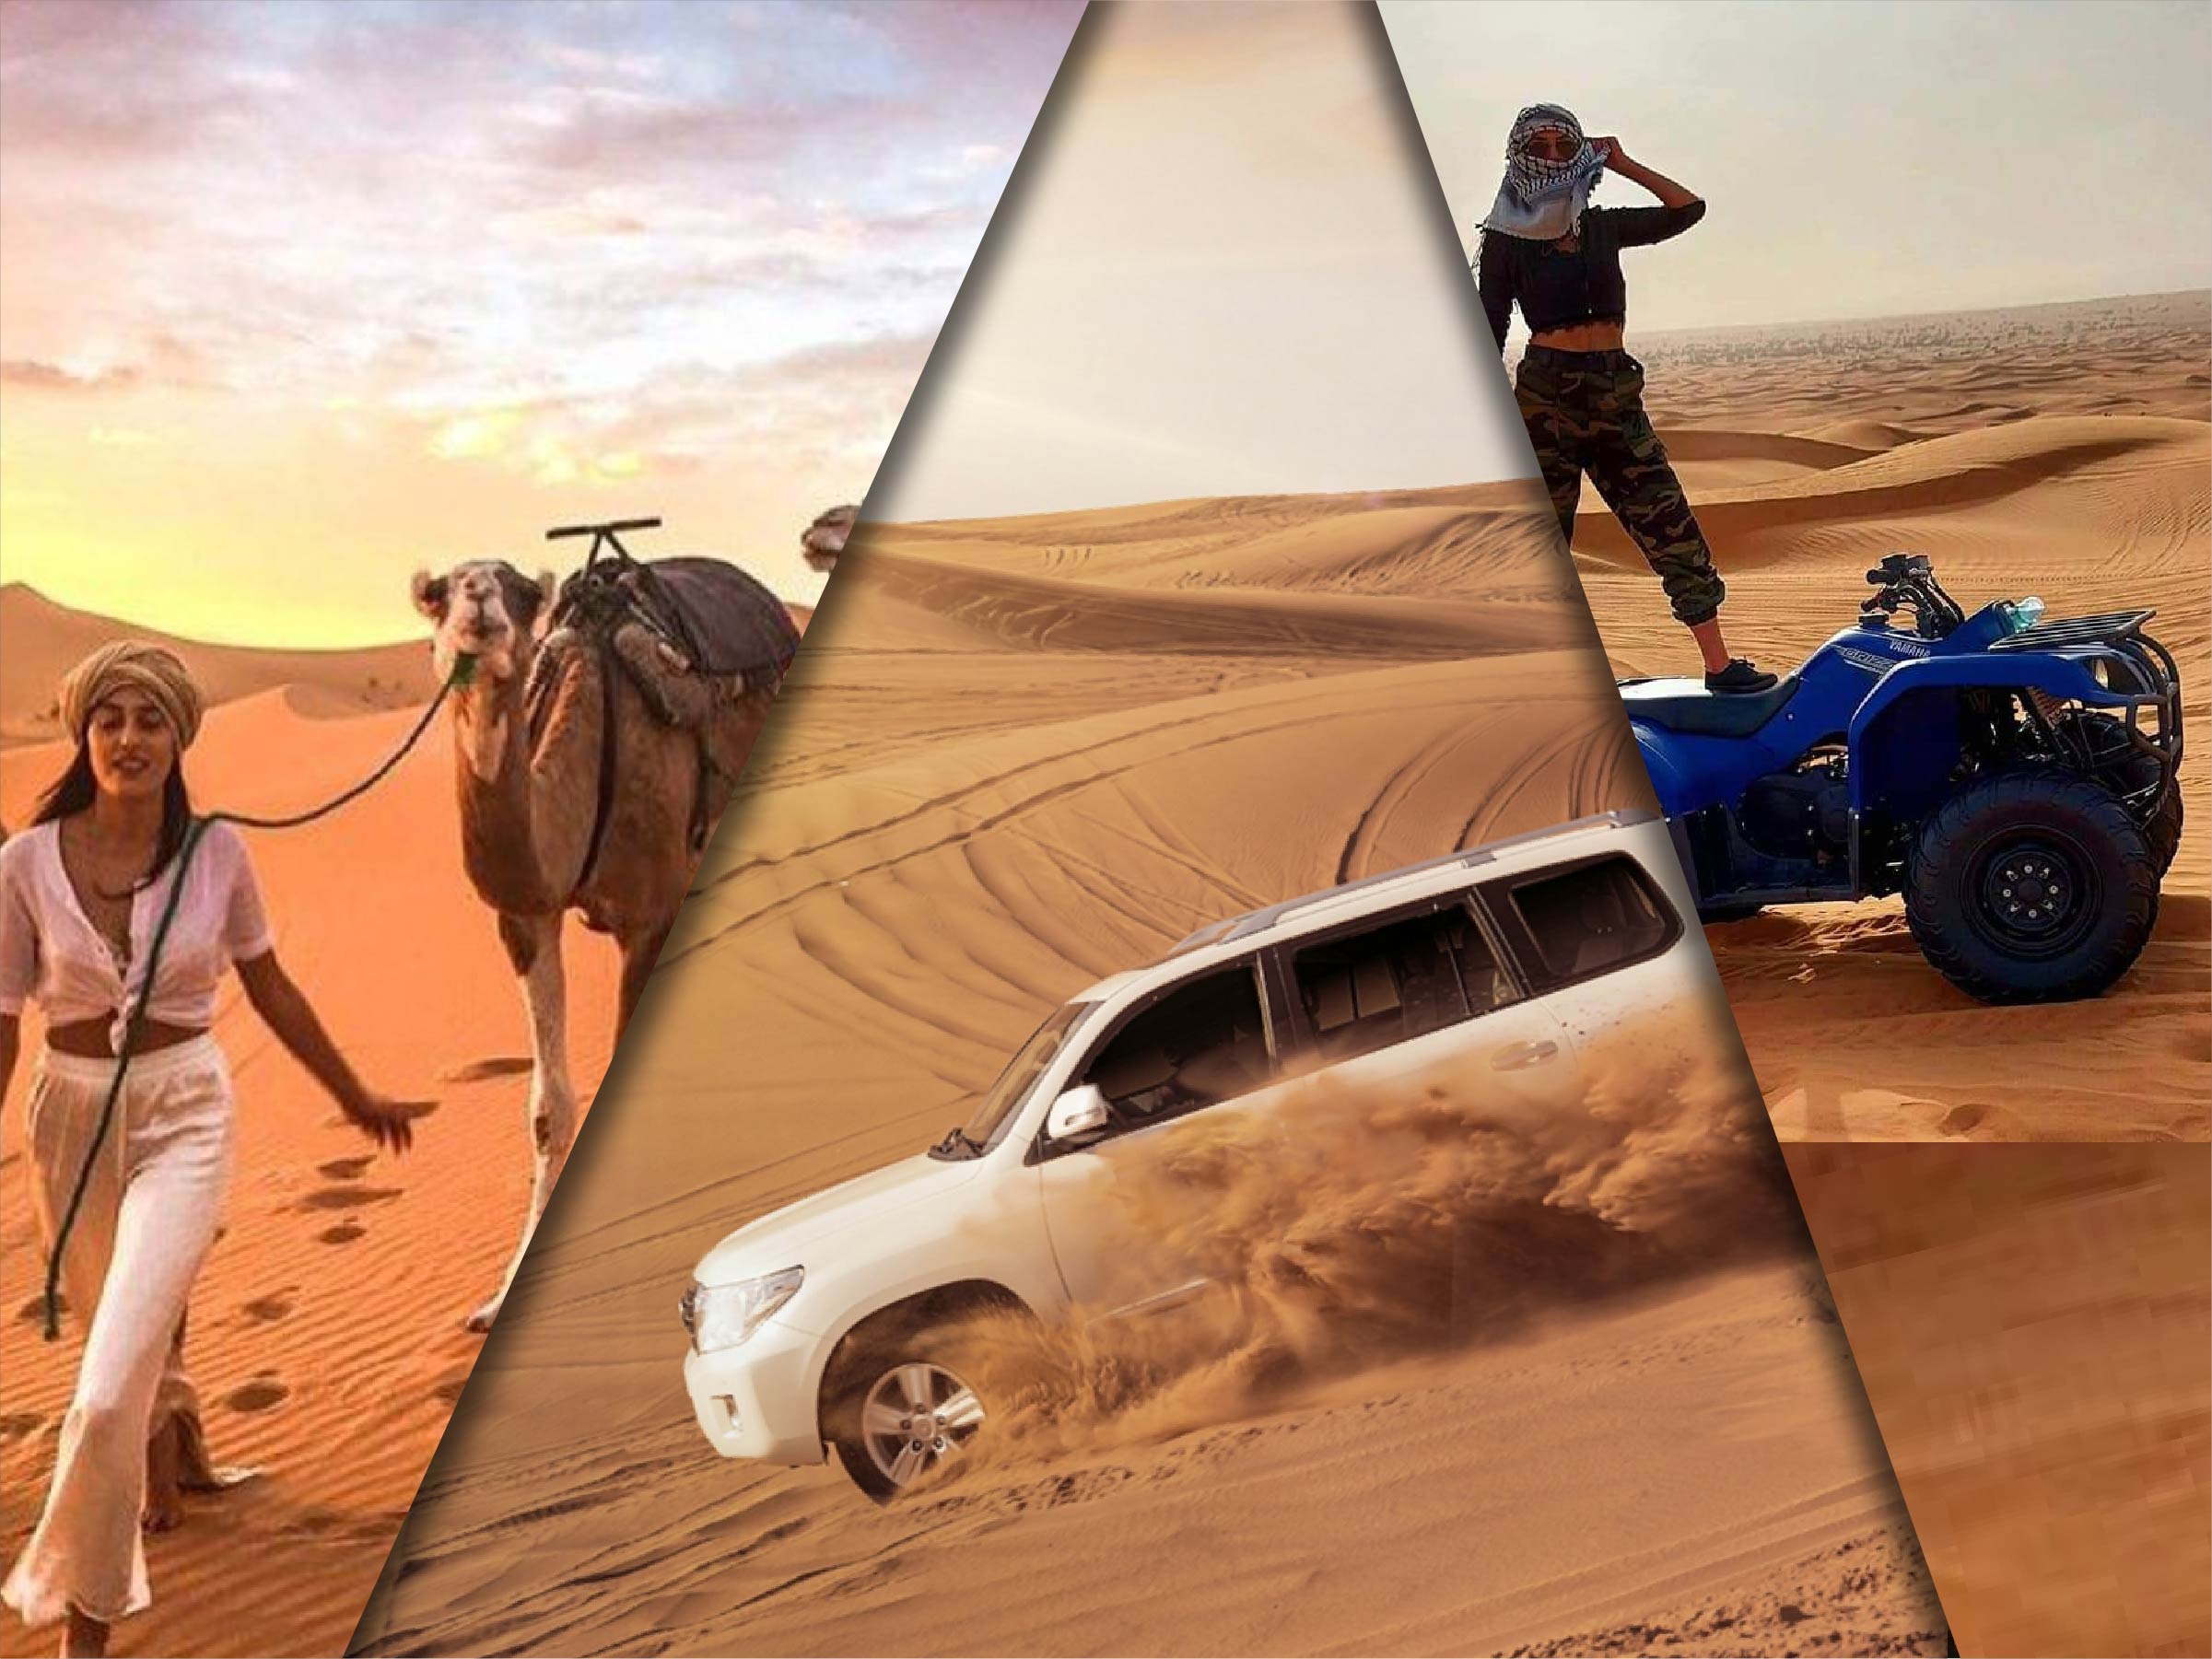 You are currently viewing The adventure of Dubai desert safari